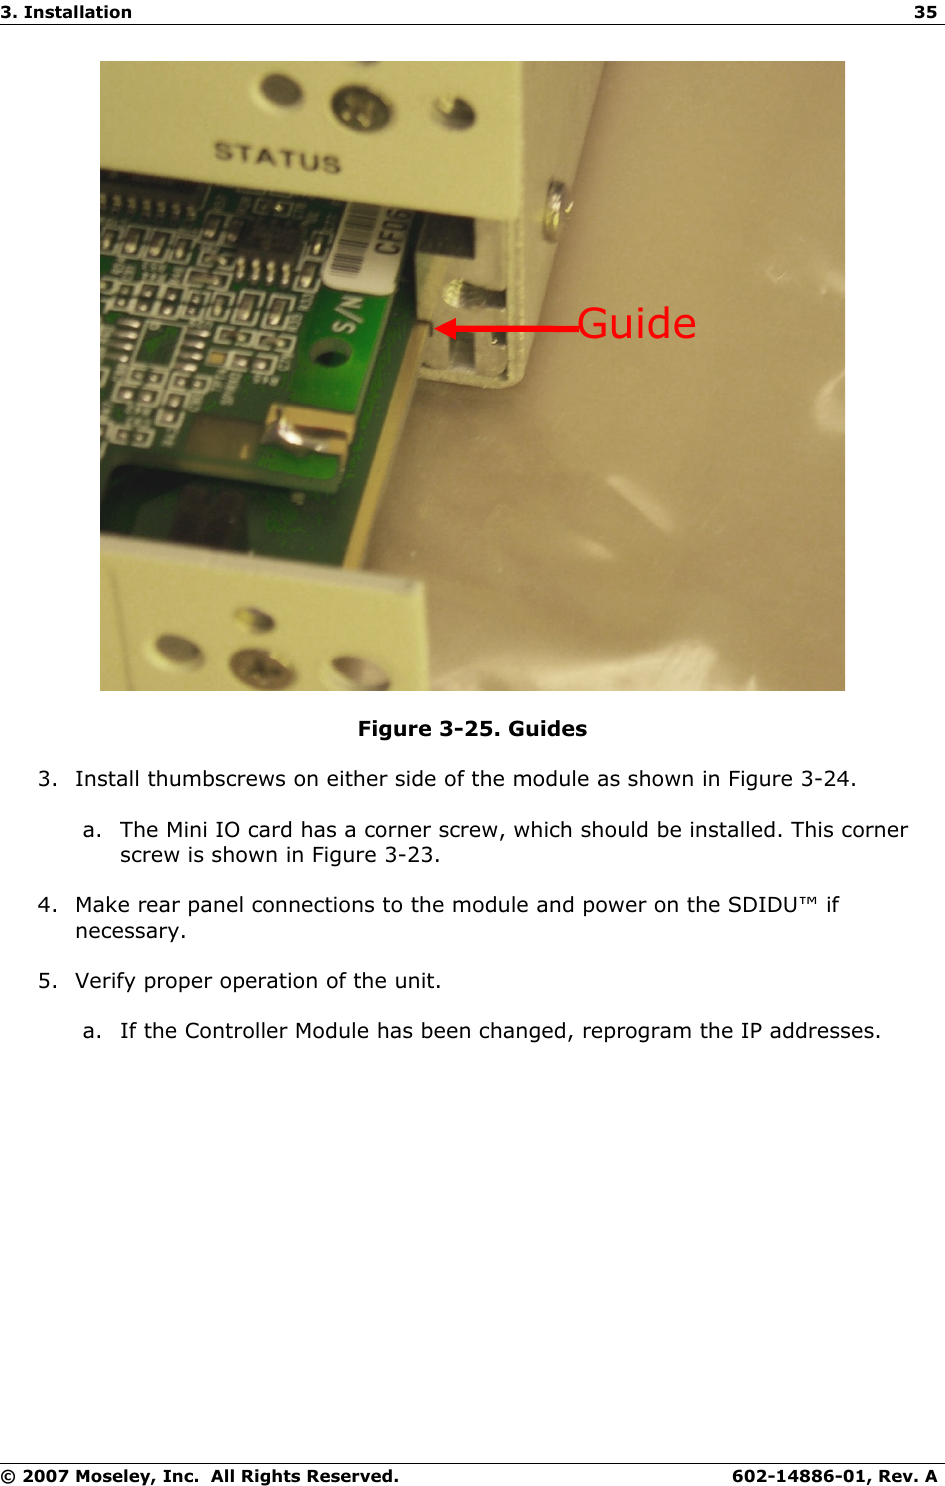 3. Installation 35Figure 3-25. Guides3. Install thumbscrews on either side of the module as shown in Figure 3-24.a. The Mini IO card has a corner screw, which should be installed. This corner screw is shown in Figure 3-23.4. Make rear panel connections to the module and power on the SDIDU™ if necessary.5. Verify proper operation of the unit.a. If the Controller Module has been changed, reprogram the IP addresses.© 2007 Moseley, Inc.  All Rights Reserved. 602-14886-01, Rev. AGuide